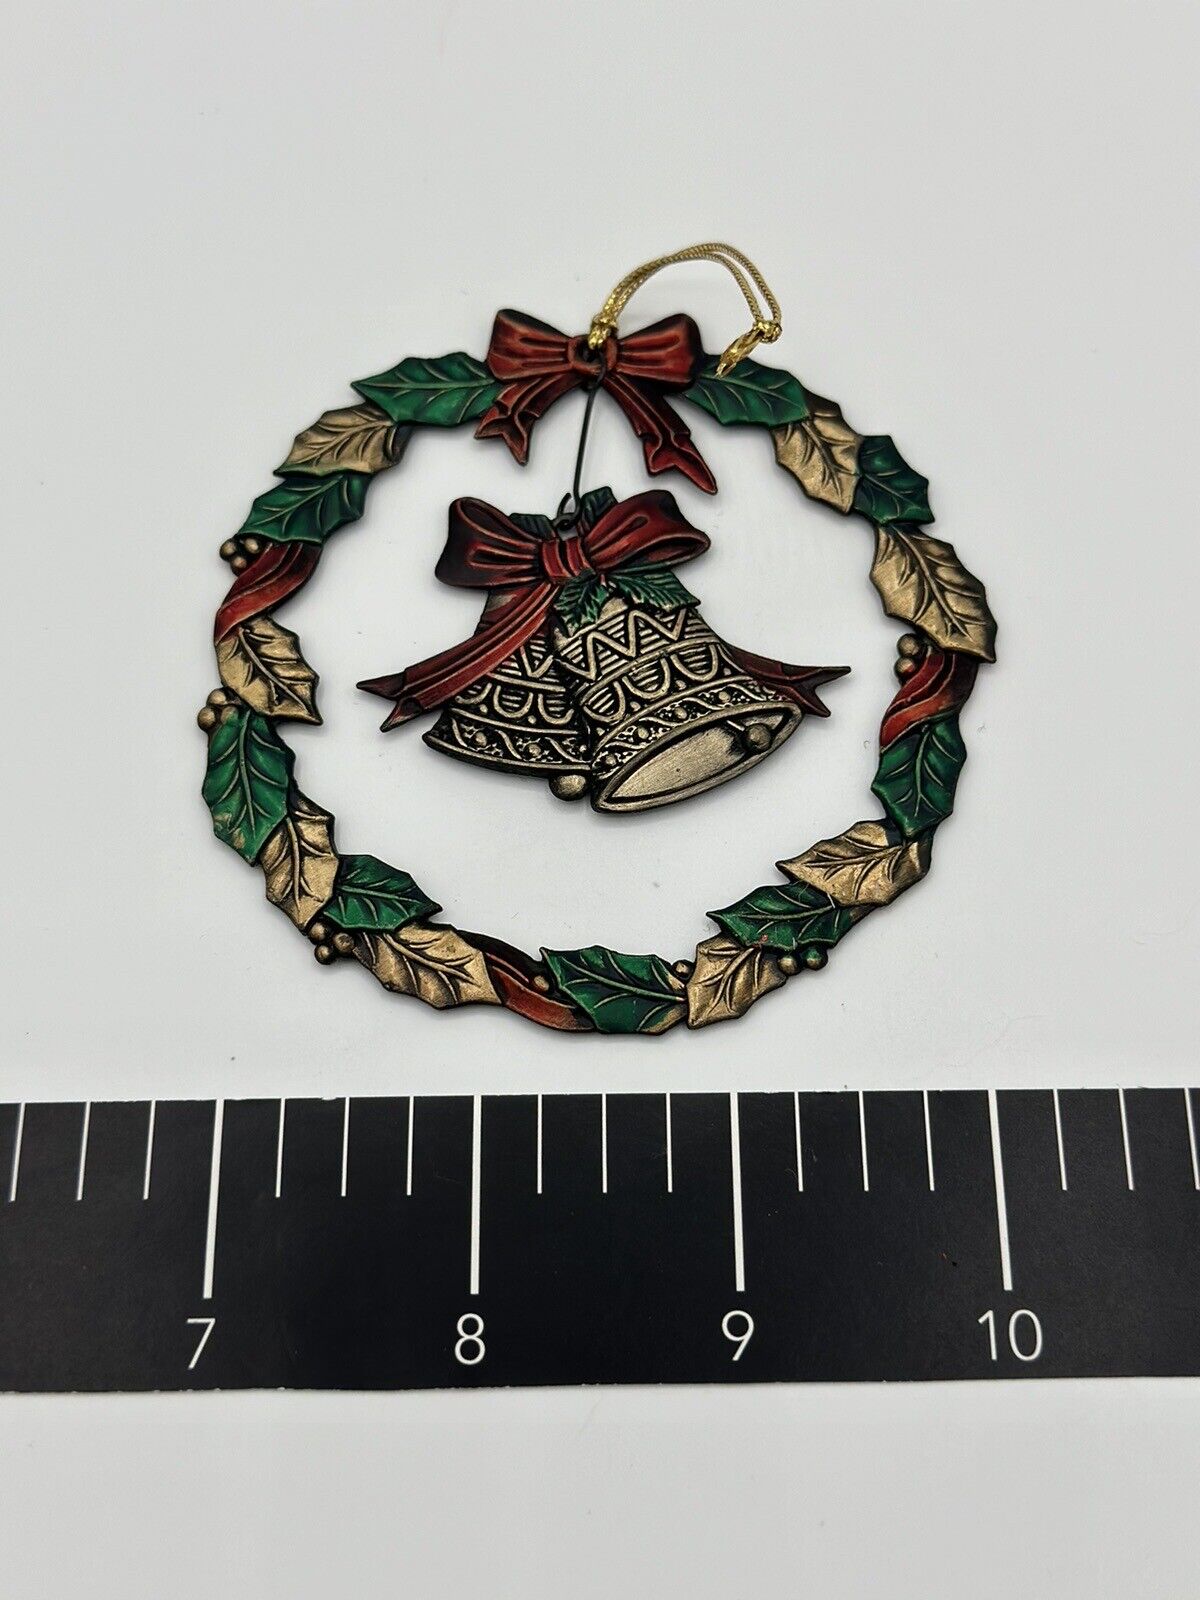 Vintage Christmas Ornament Metal Wreath with Dangling Bell - Russ Berrie  